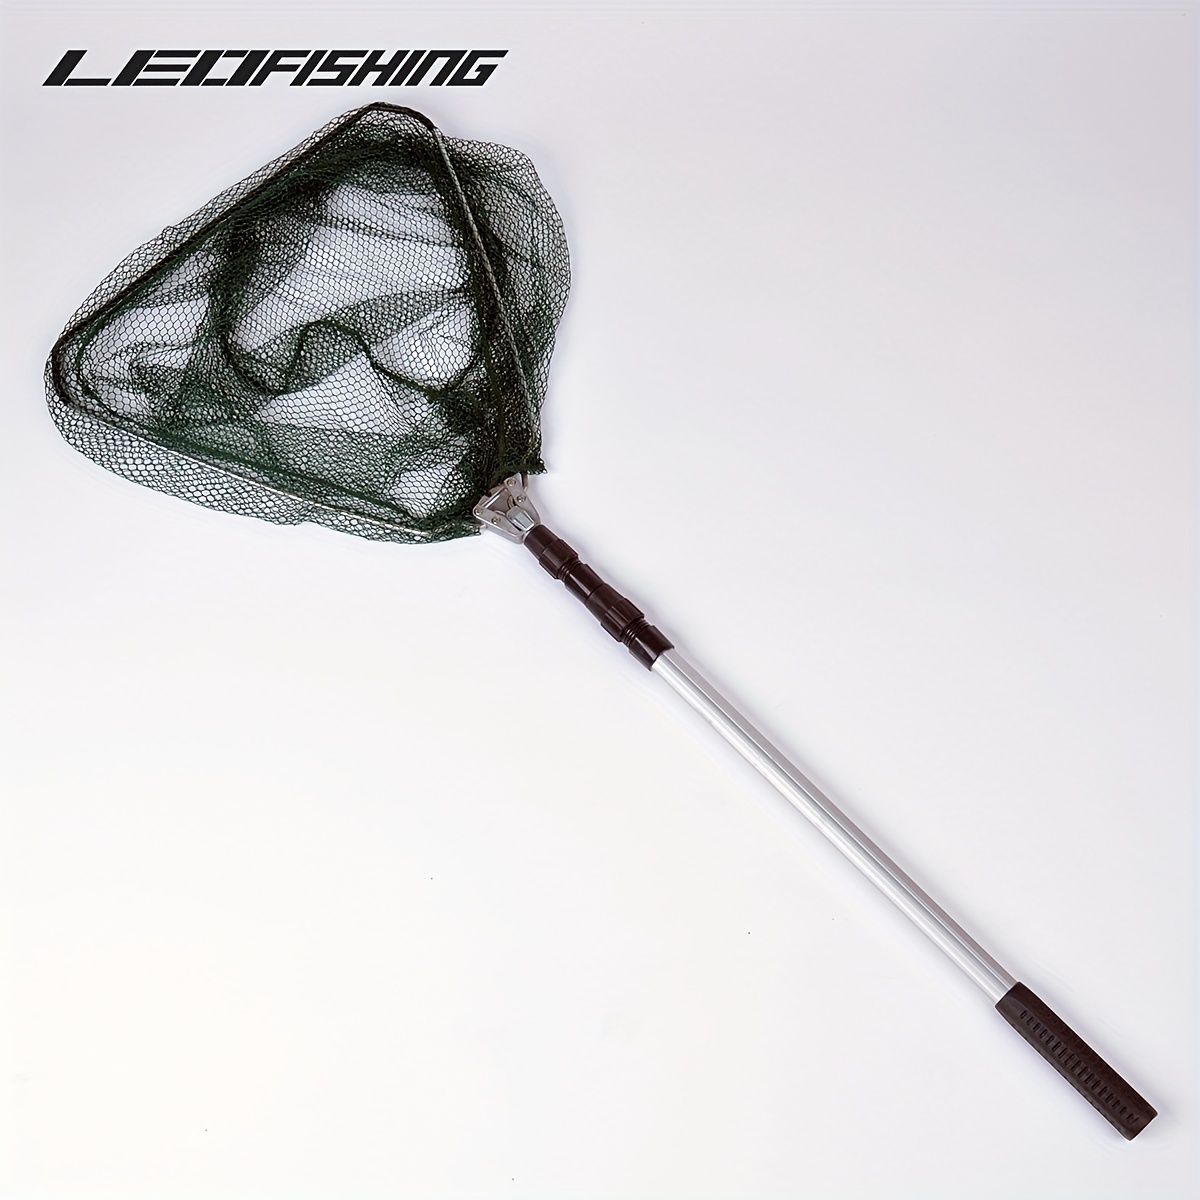 LEOFISHING Portable Aluminum Alloy Triangular Fishing Net - Collapsible and  Retractable for Easy Storage - Ideal for Catching Bass, Trout, and Perch